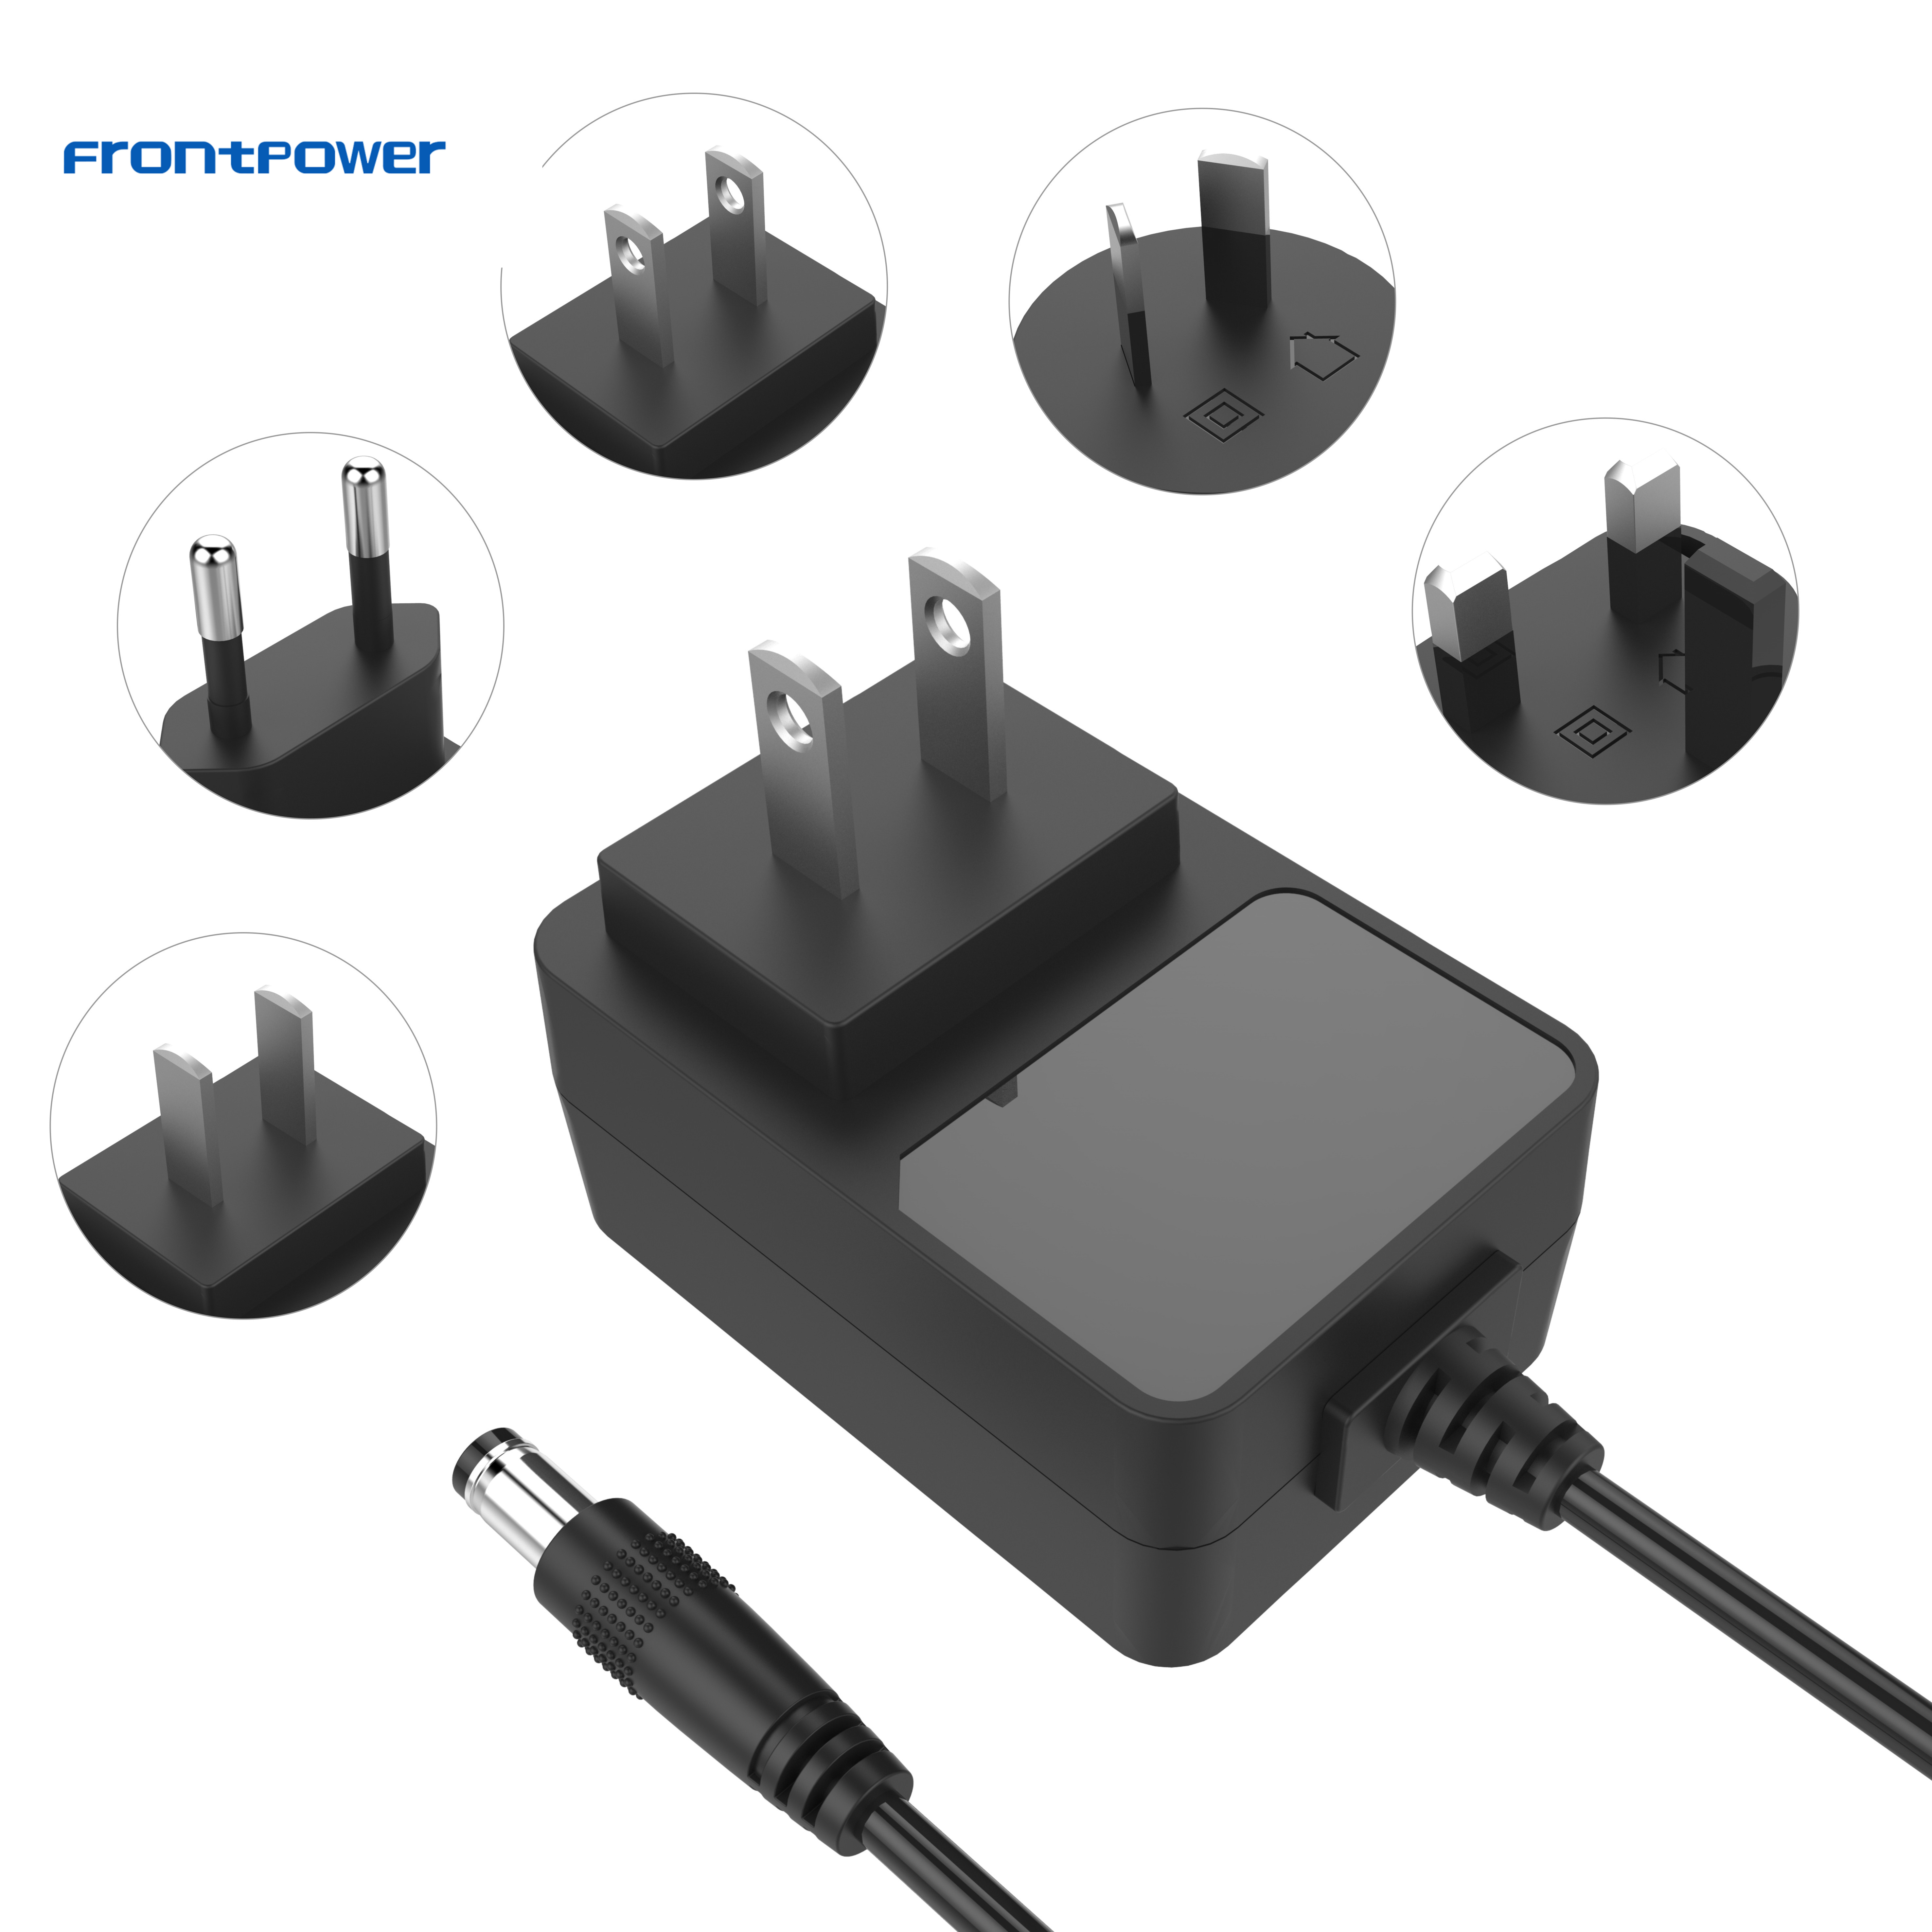 Frontpower adapter ECAS certificate 12W 5V 2.5A 5V 2A 6V 1A 6V 2A 8V 1.5A wall plug fixed type adapter